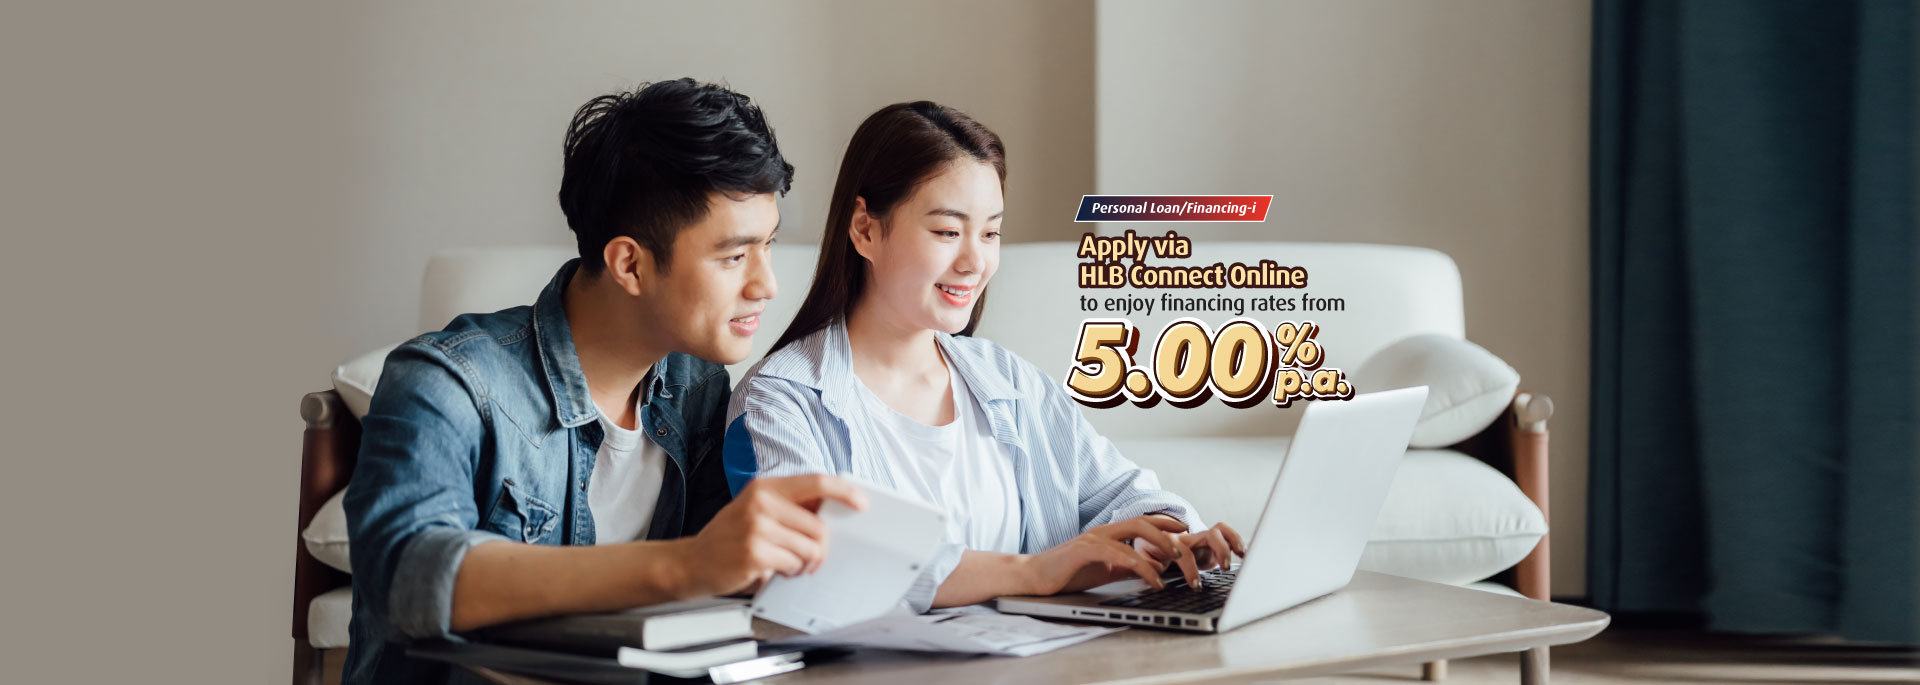 Enjoy exclusive flat rates when you apply via HLB Connect Online Banking